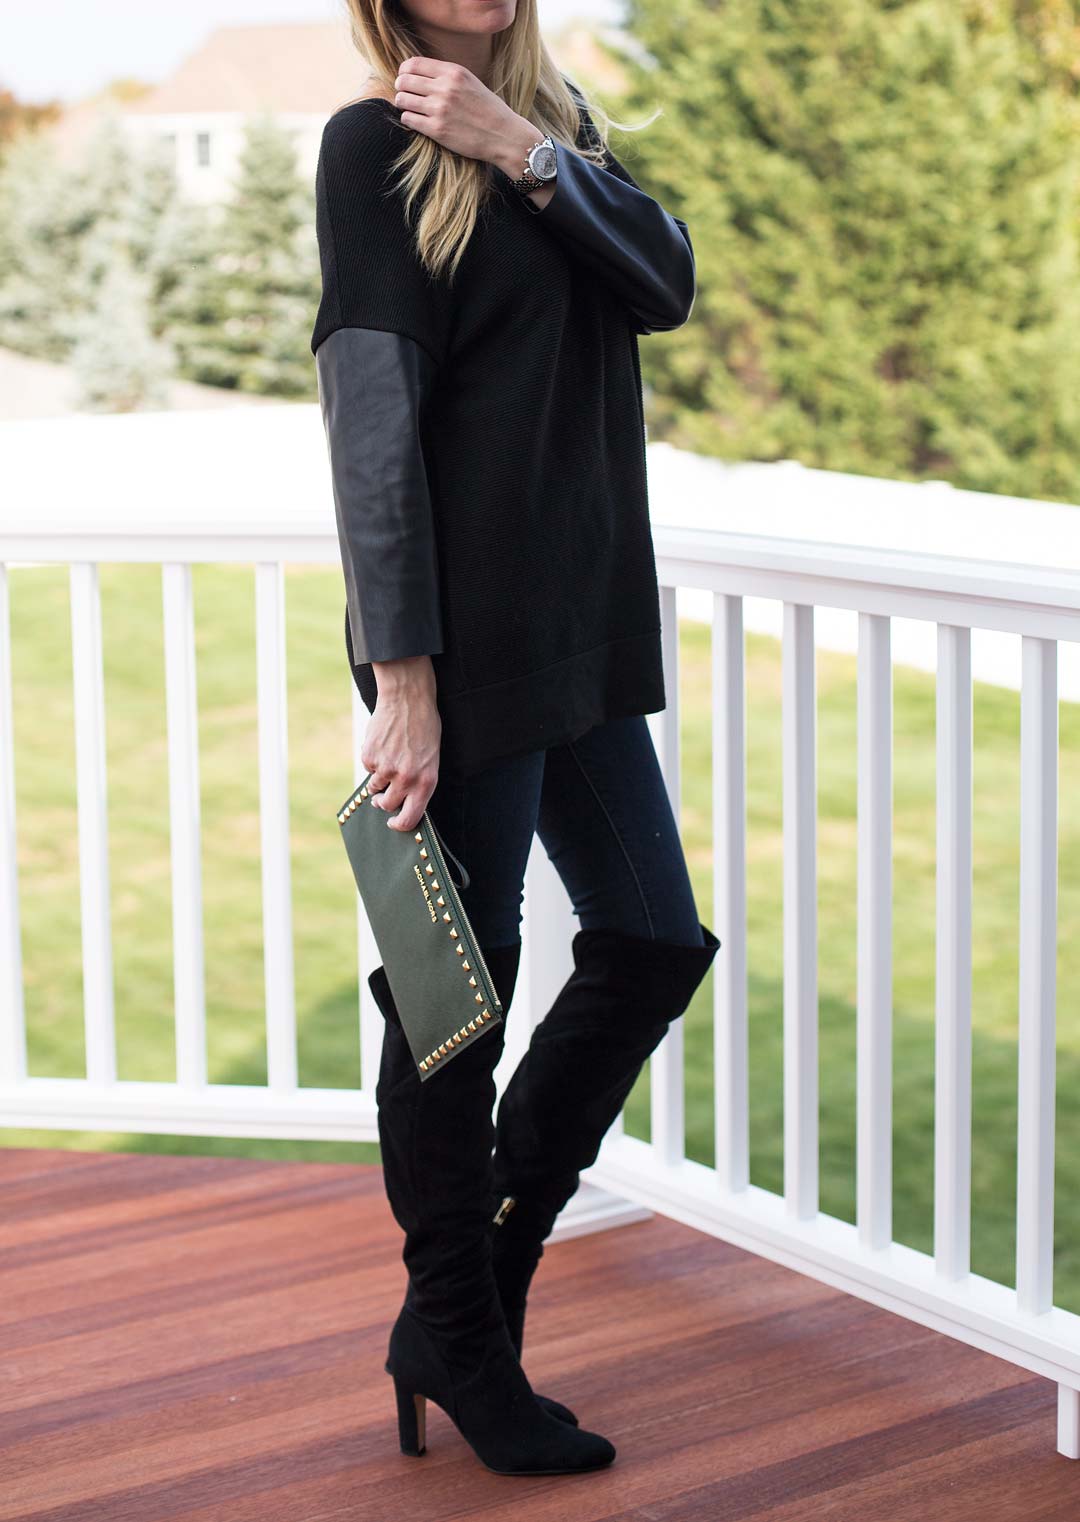 zara sweater with leather sleeves